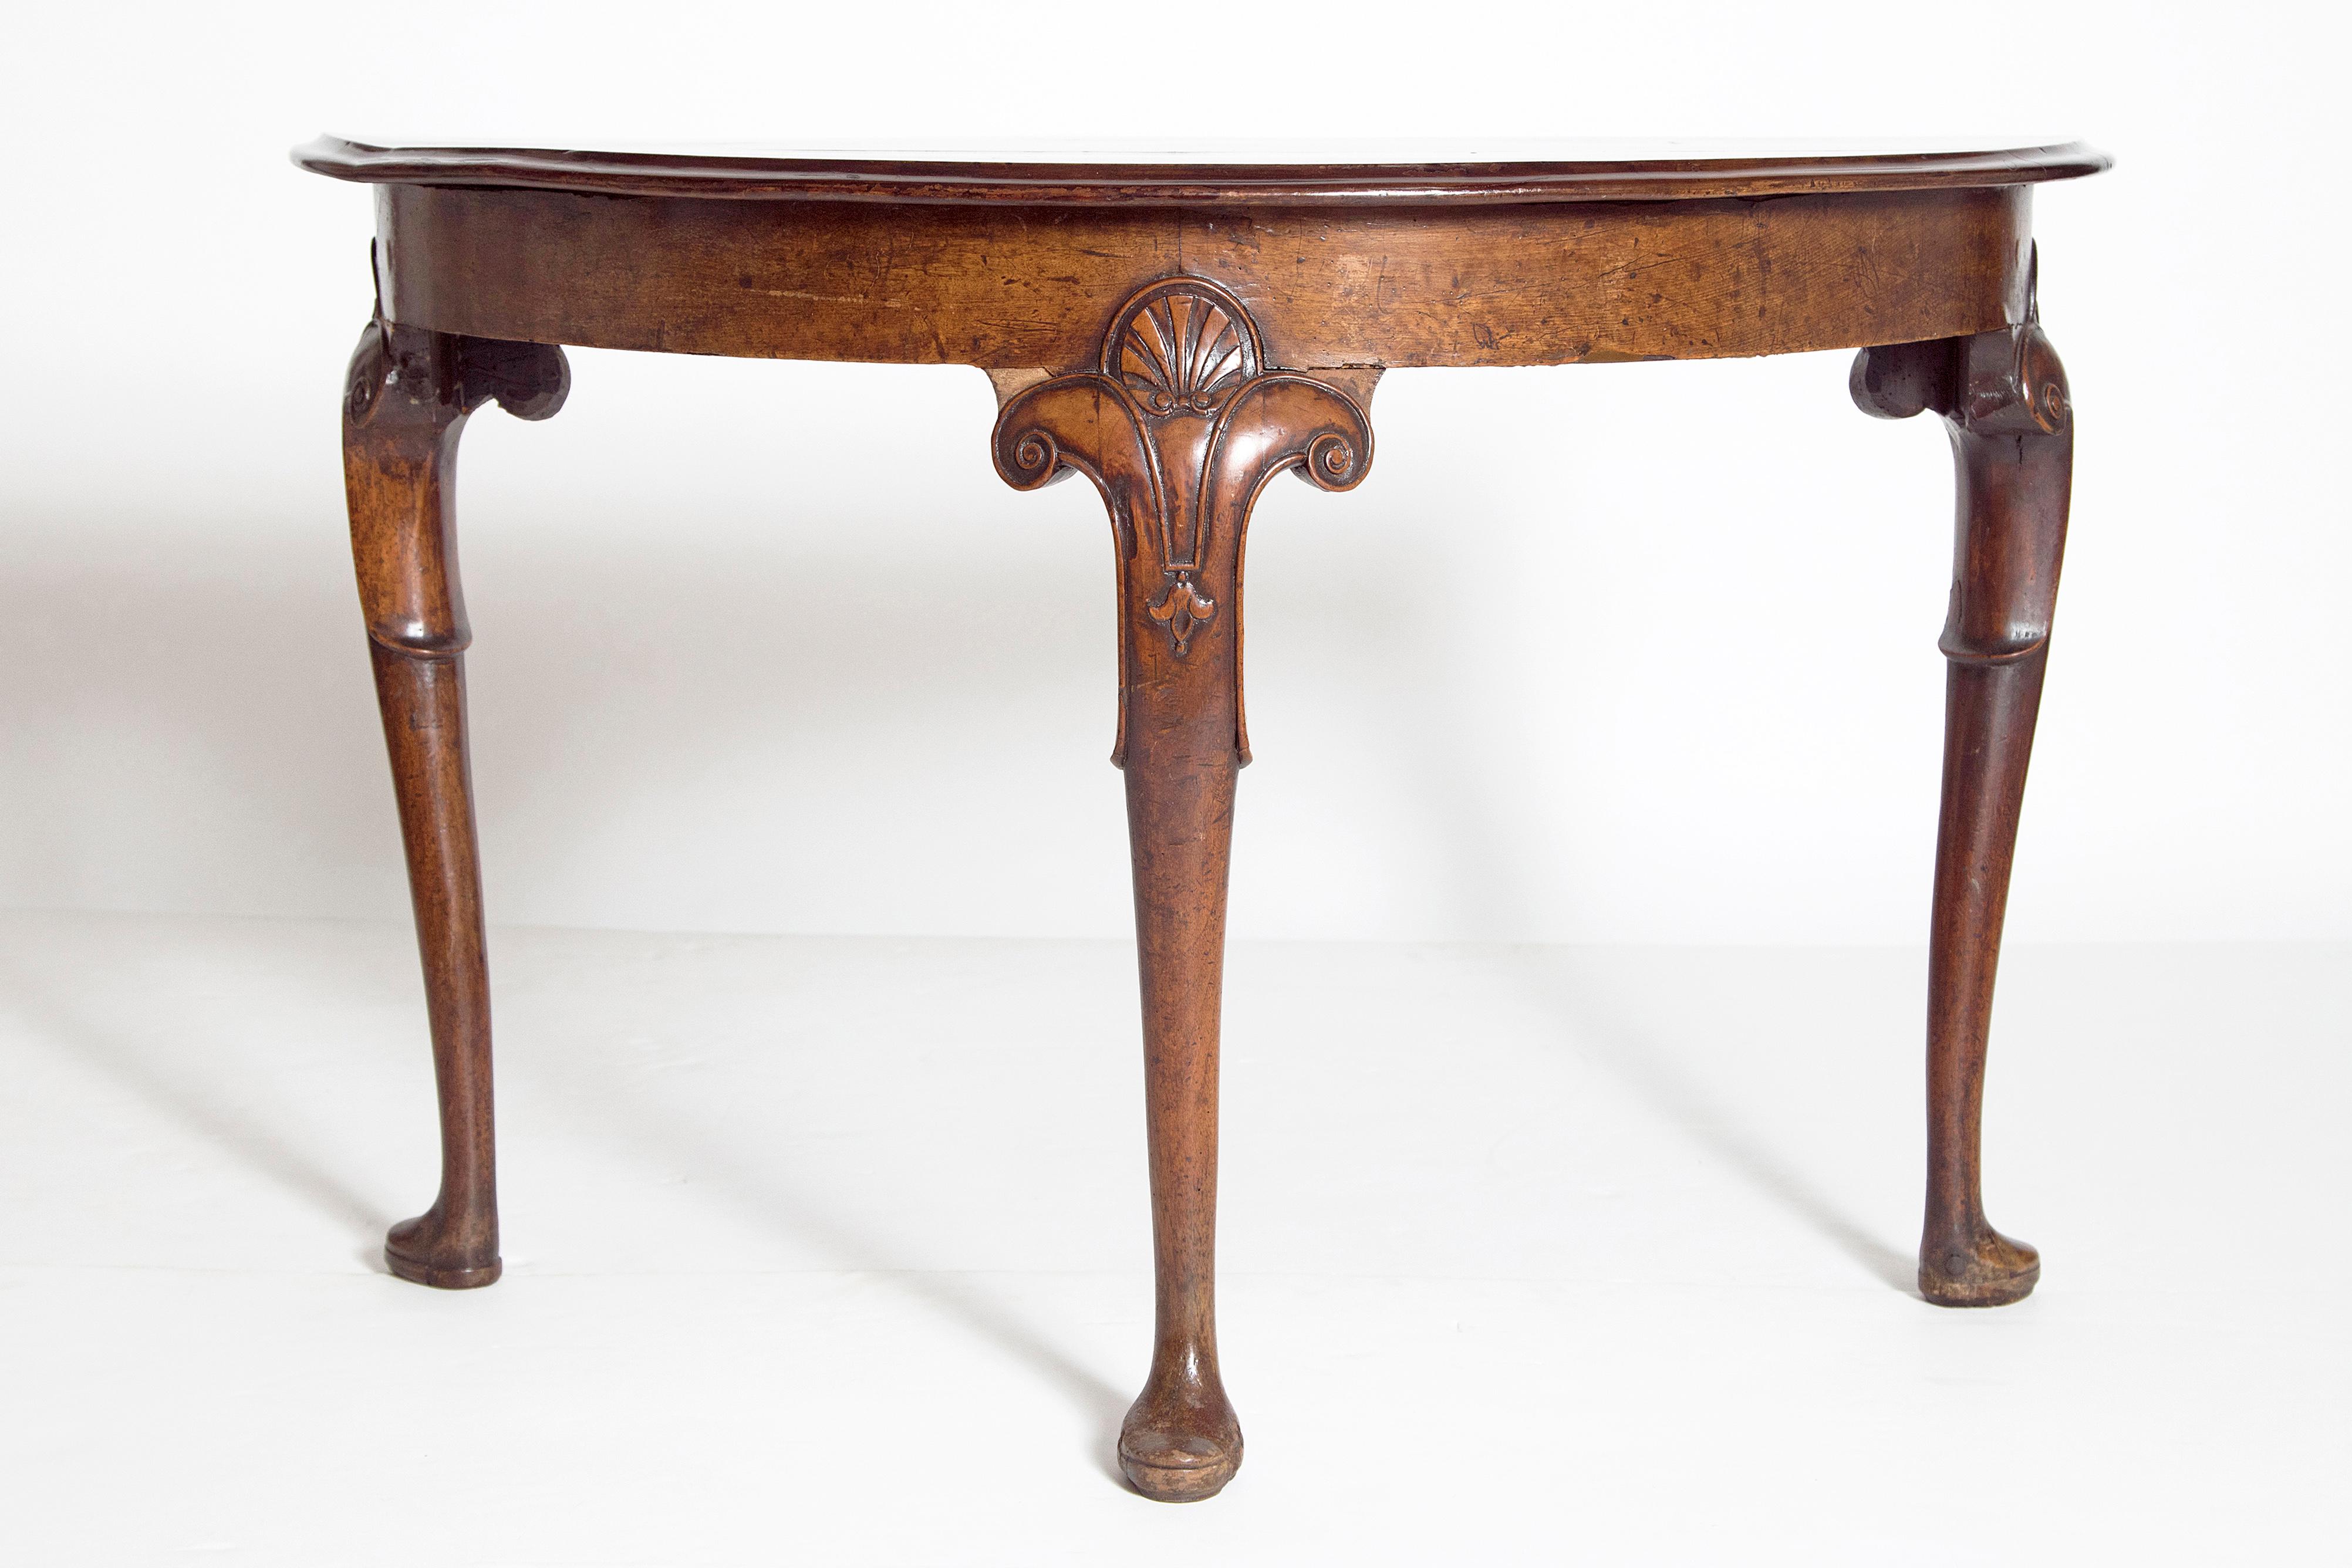 A lovely walnut demilune with three cabriole legs resting on pad feet. The two back legs are turned to the rear. The apron is burl and the knees of the legs are carved with a shell and curls. Ireland, circa 1720.